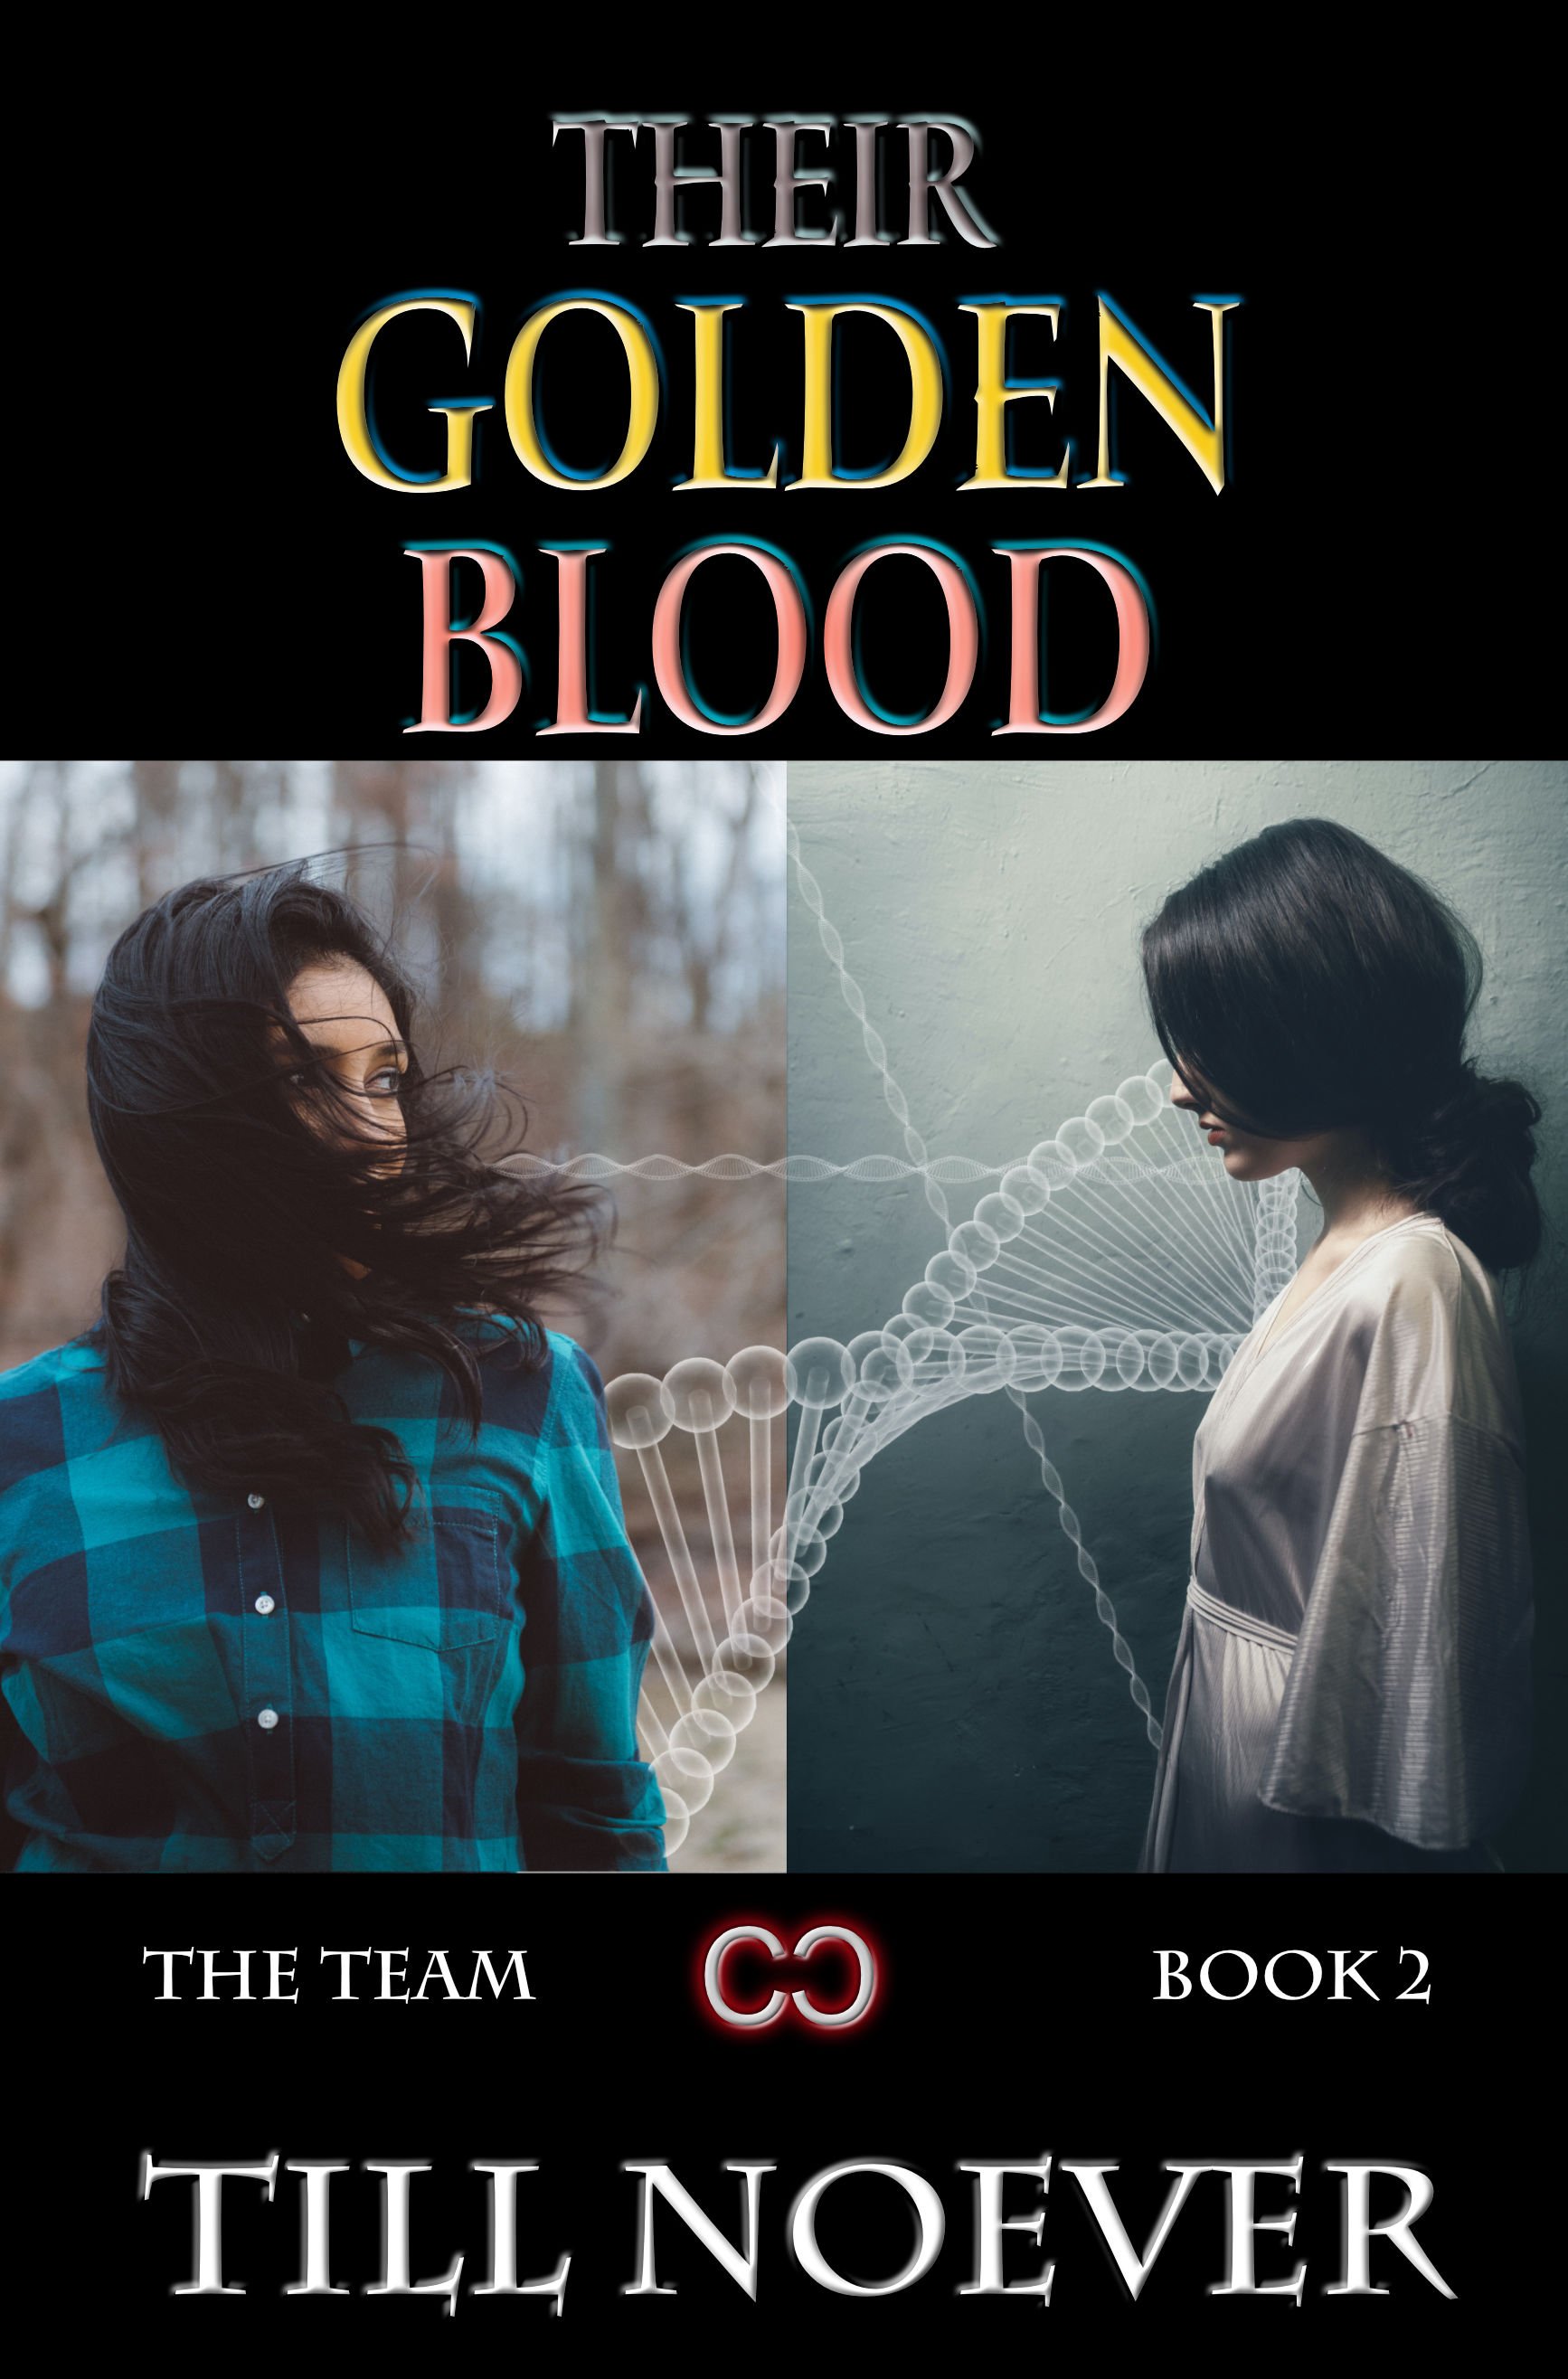 THEIR GOLDEN BLOOD KINDLE Cover-Amazon v5.0.jpg